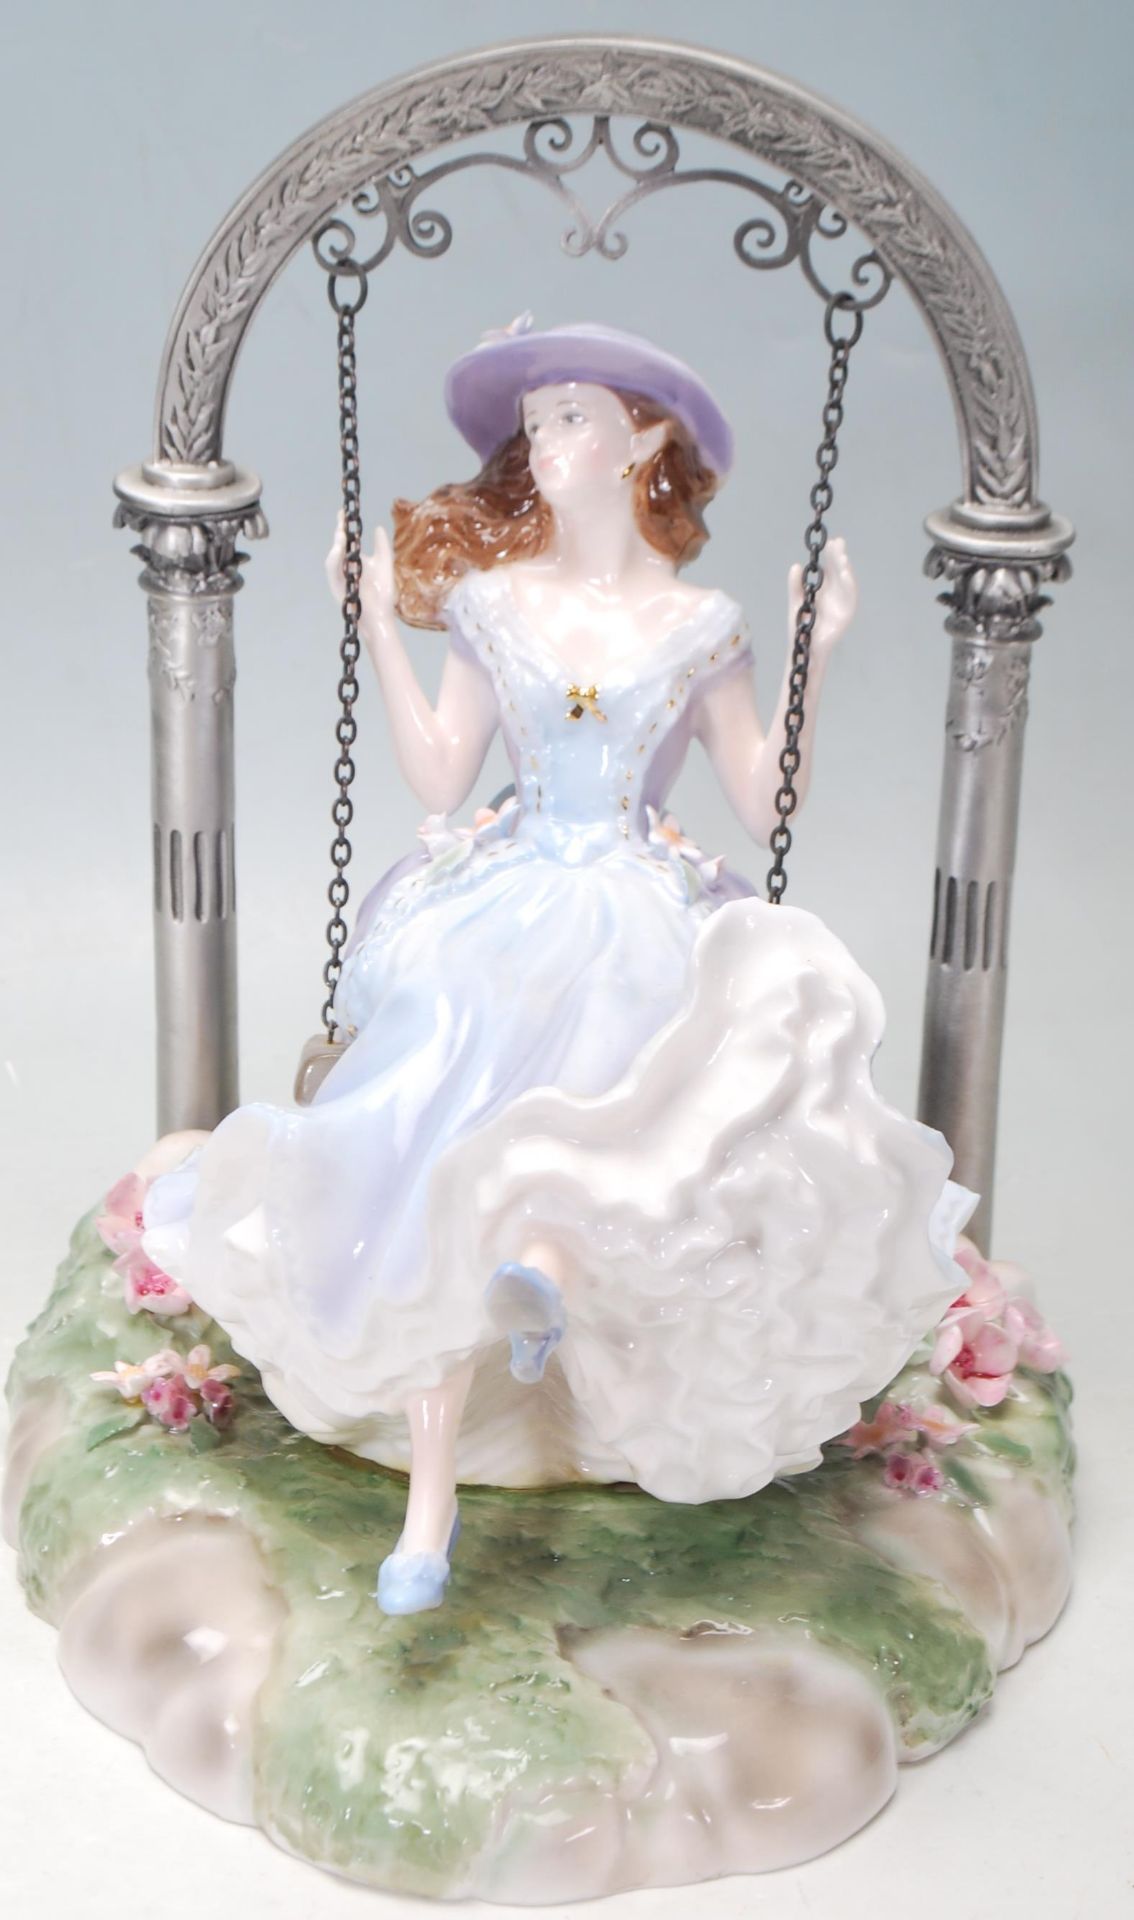 20TH CENTURY ROYAL WORCESTER LIMITED EDITION 50/250 CERAMIC FIGURINE - THE SWING - CW519 - Image 2 of 6